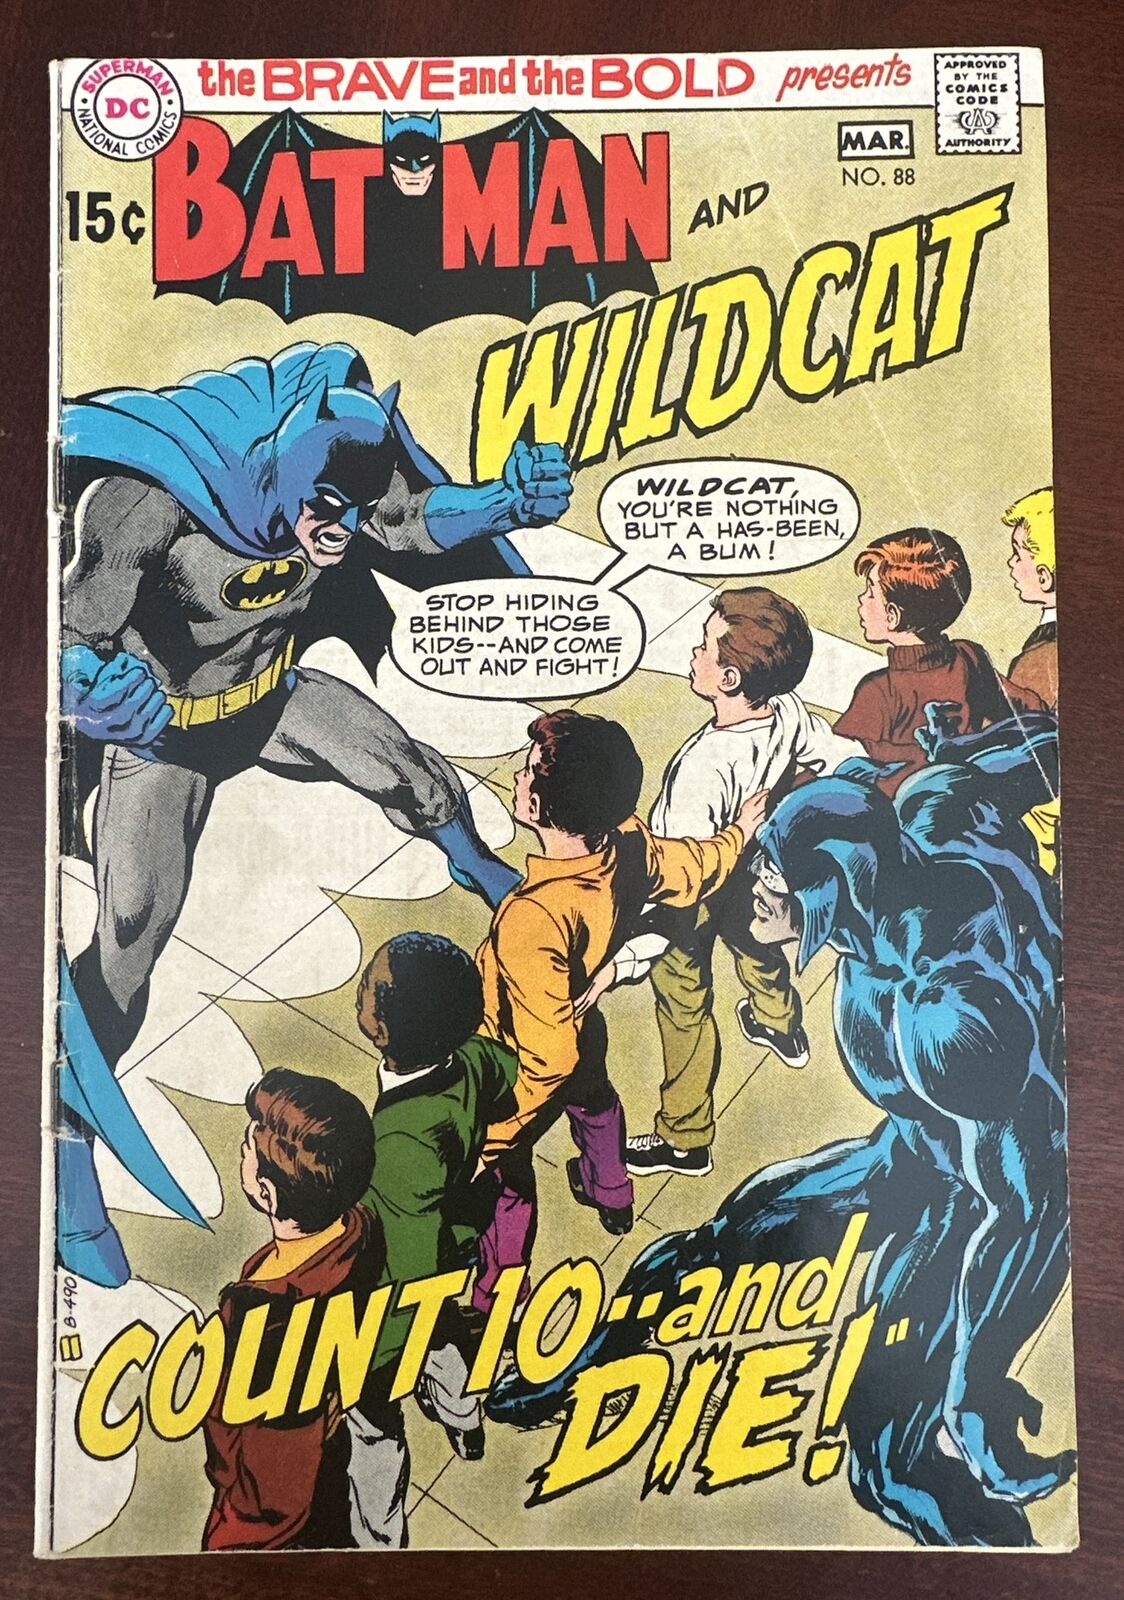 BATMAN 1970 - Brave and the Bold #88 - Batman and Wildcat